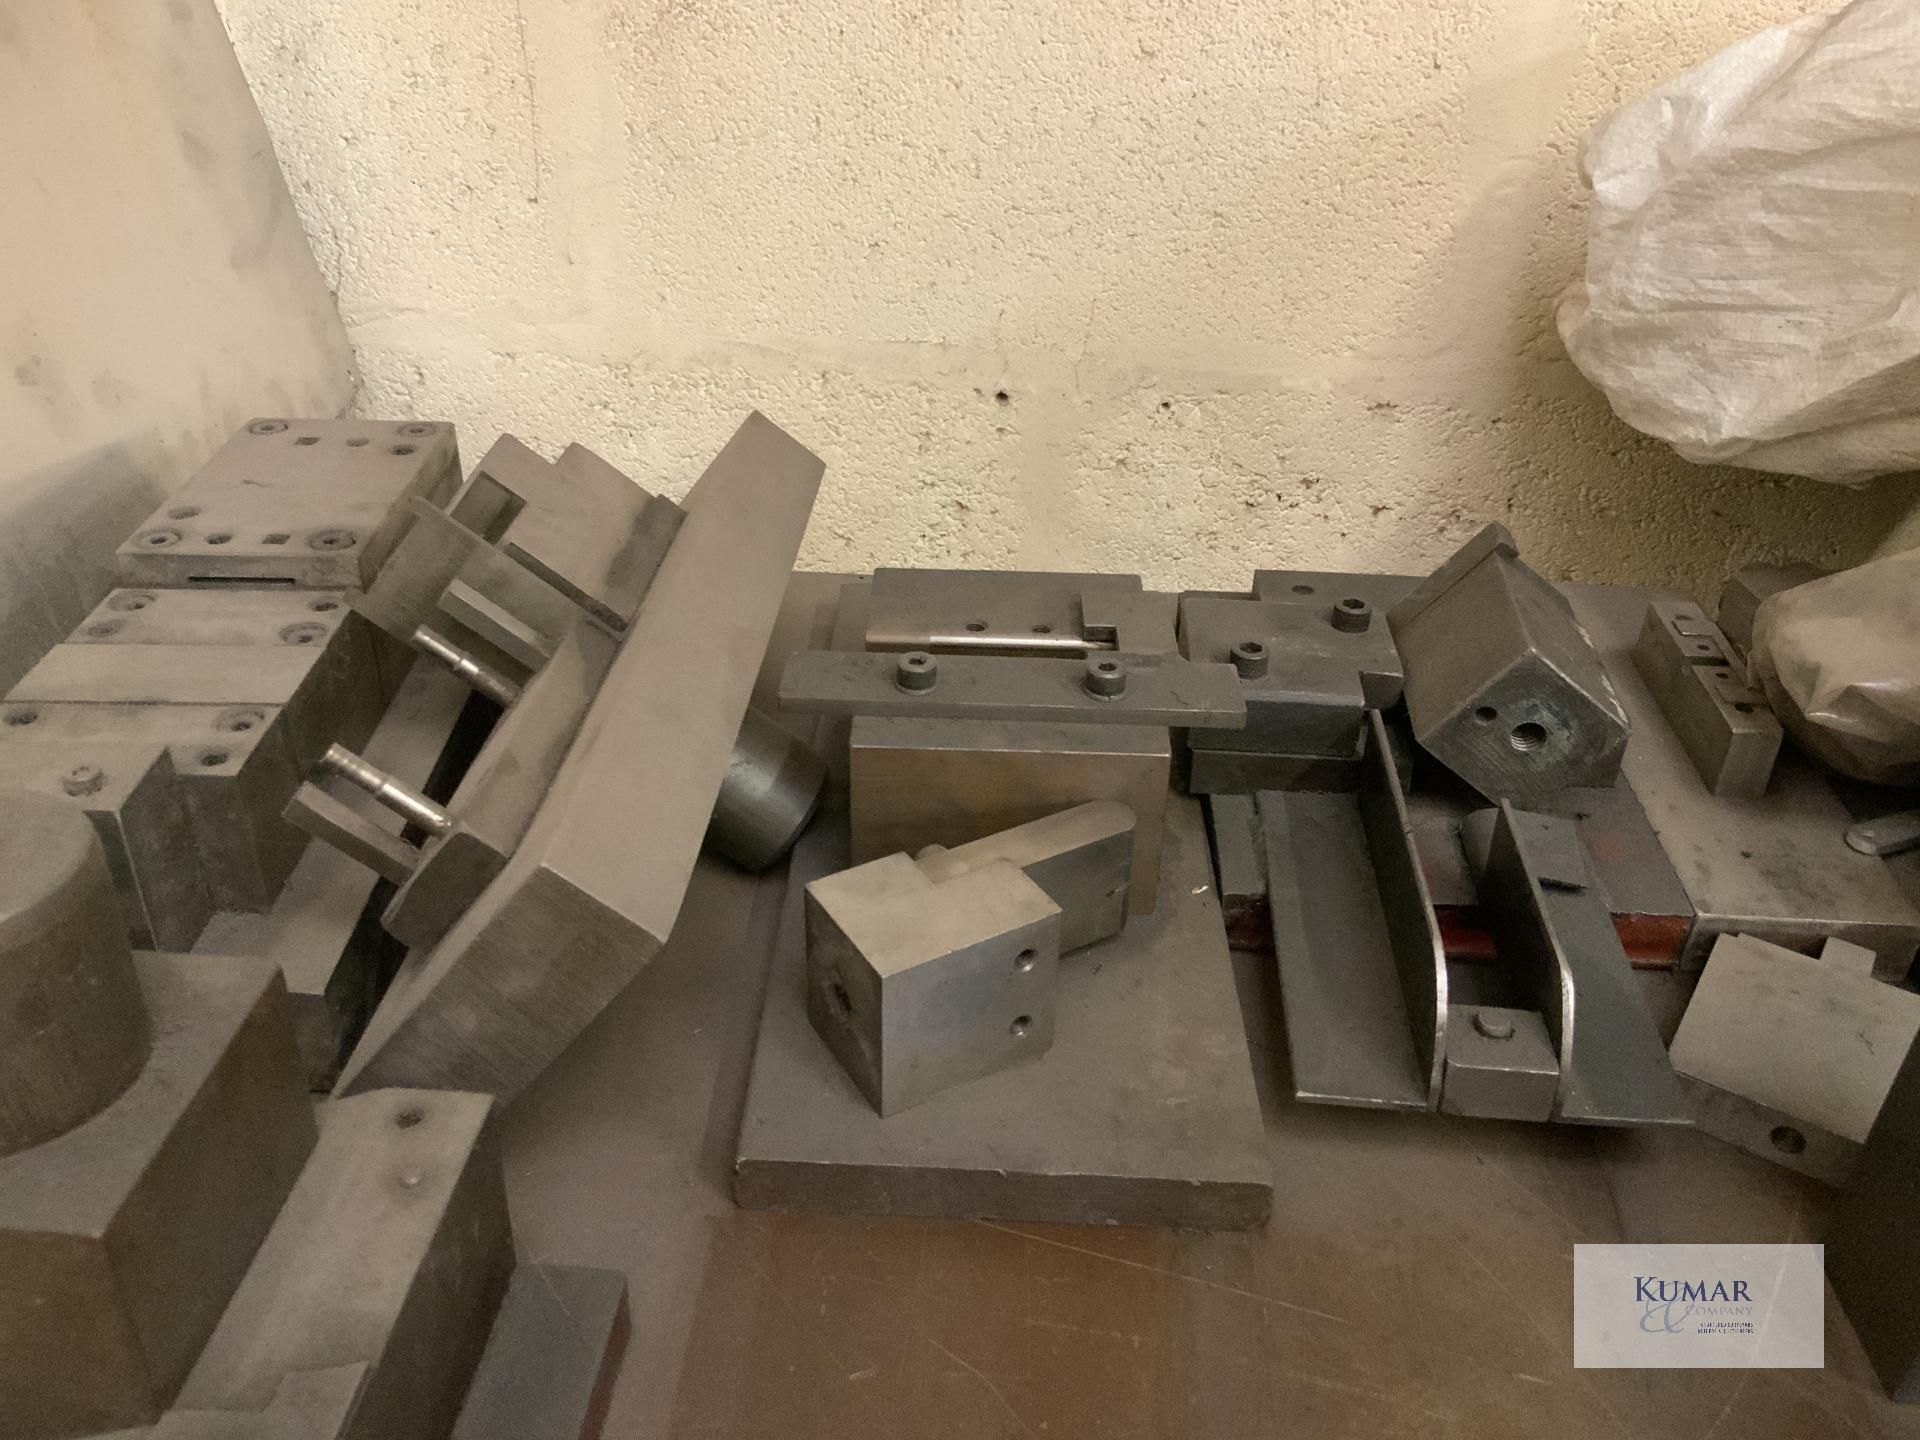 Machine tooling as imaged -  Collection Day – Tuesday 27th February Unit 4 Goscote Industrial - Image 6 of 9